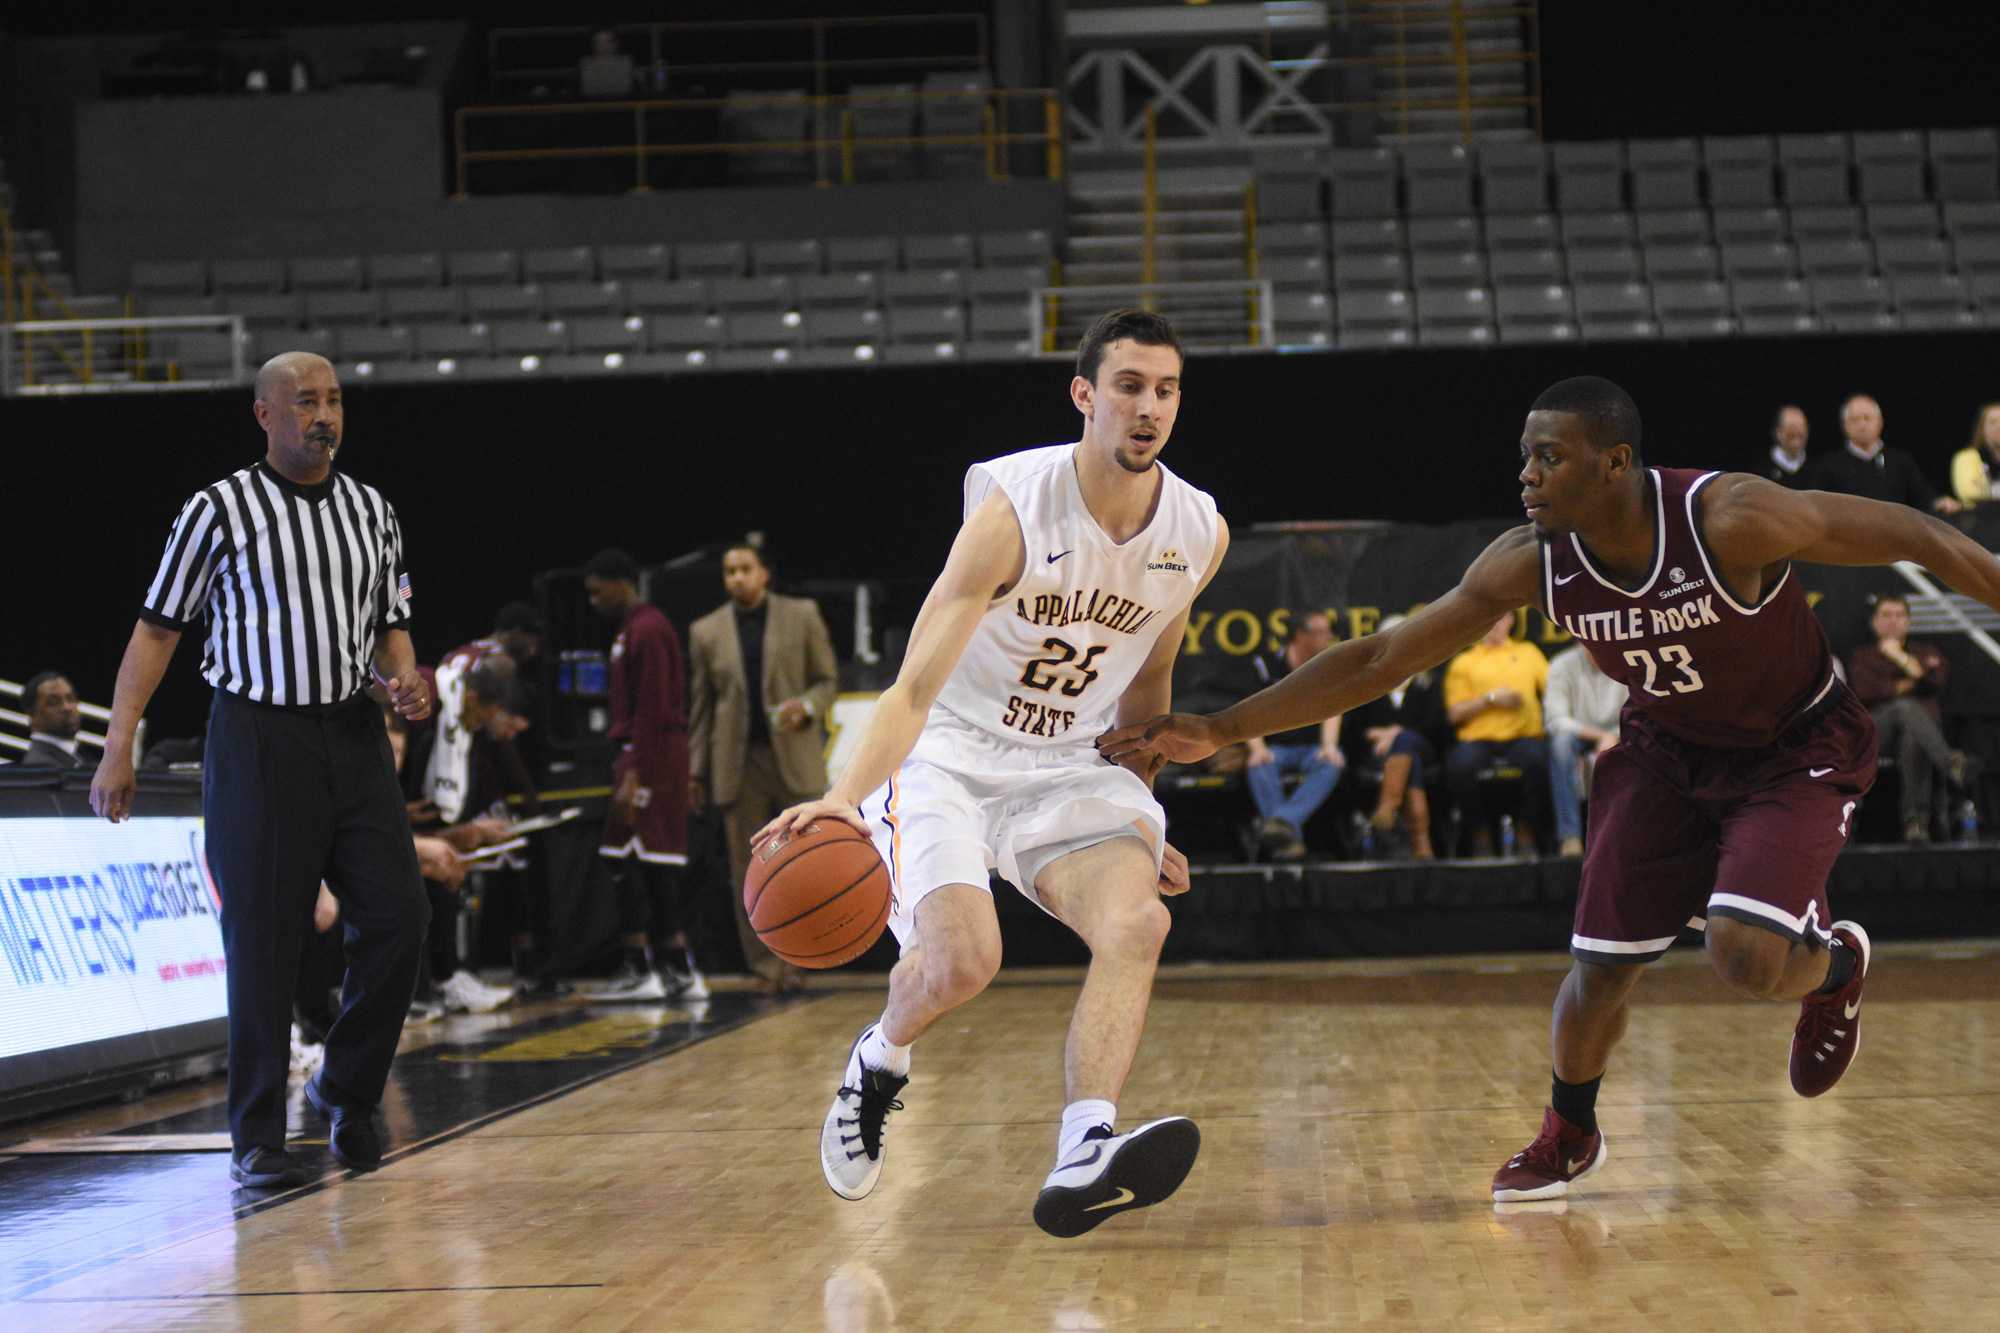 Junior guard, Jake Babic, dribbles the ball down the court during the game against Little Rock last season. He is one of the first players that Jim Fox recruited at Appalachian State.